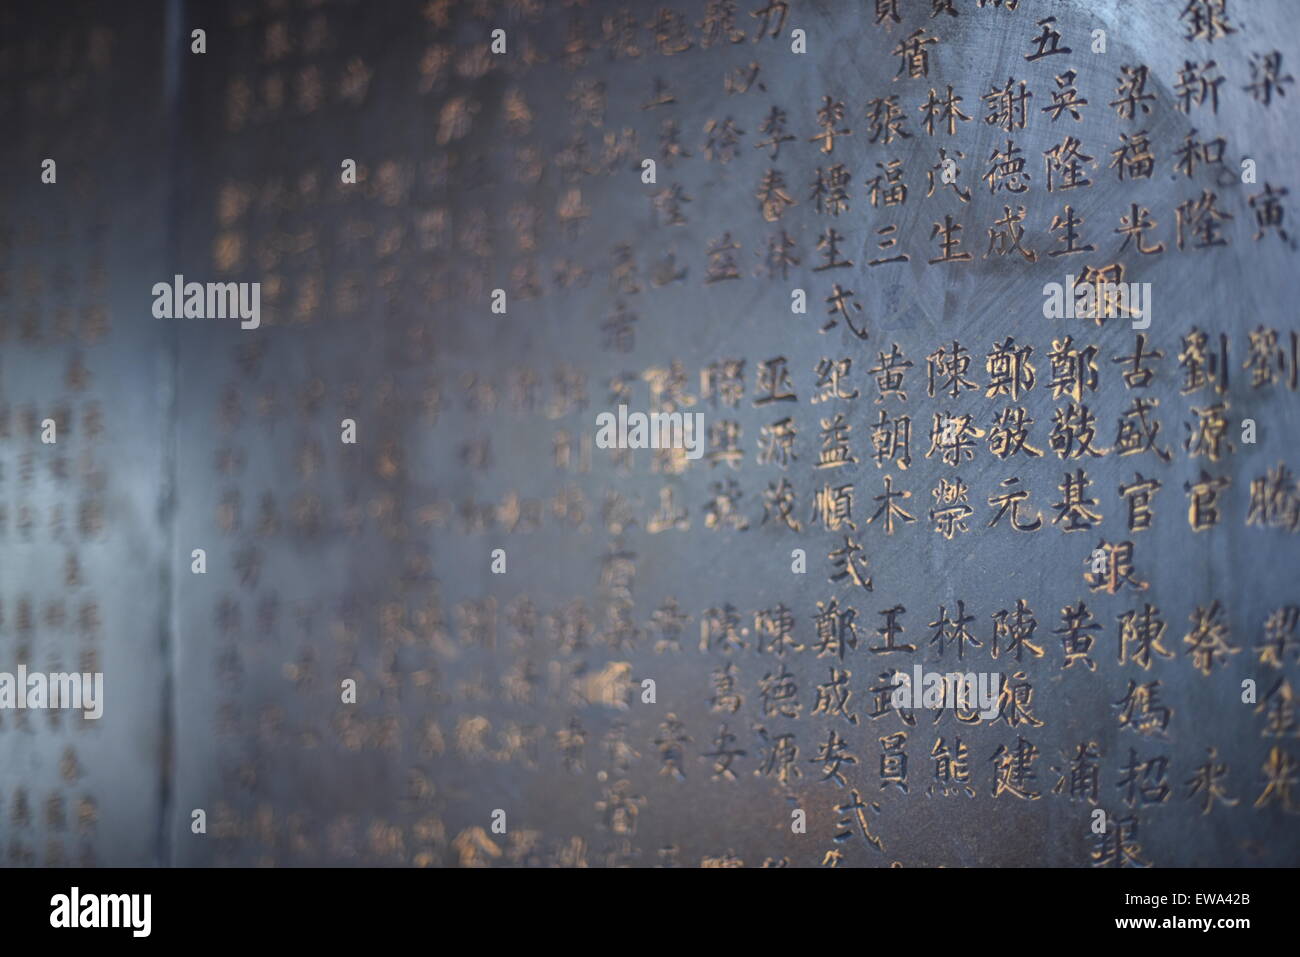 Chinese lines engraved on a stone plate at Jin De Yuan temple, Jakarta, Indonesia. Stock Photo